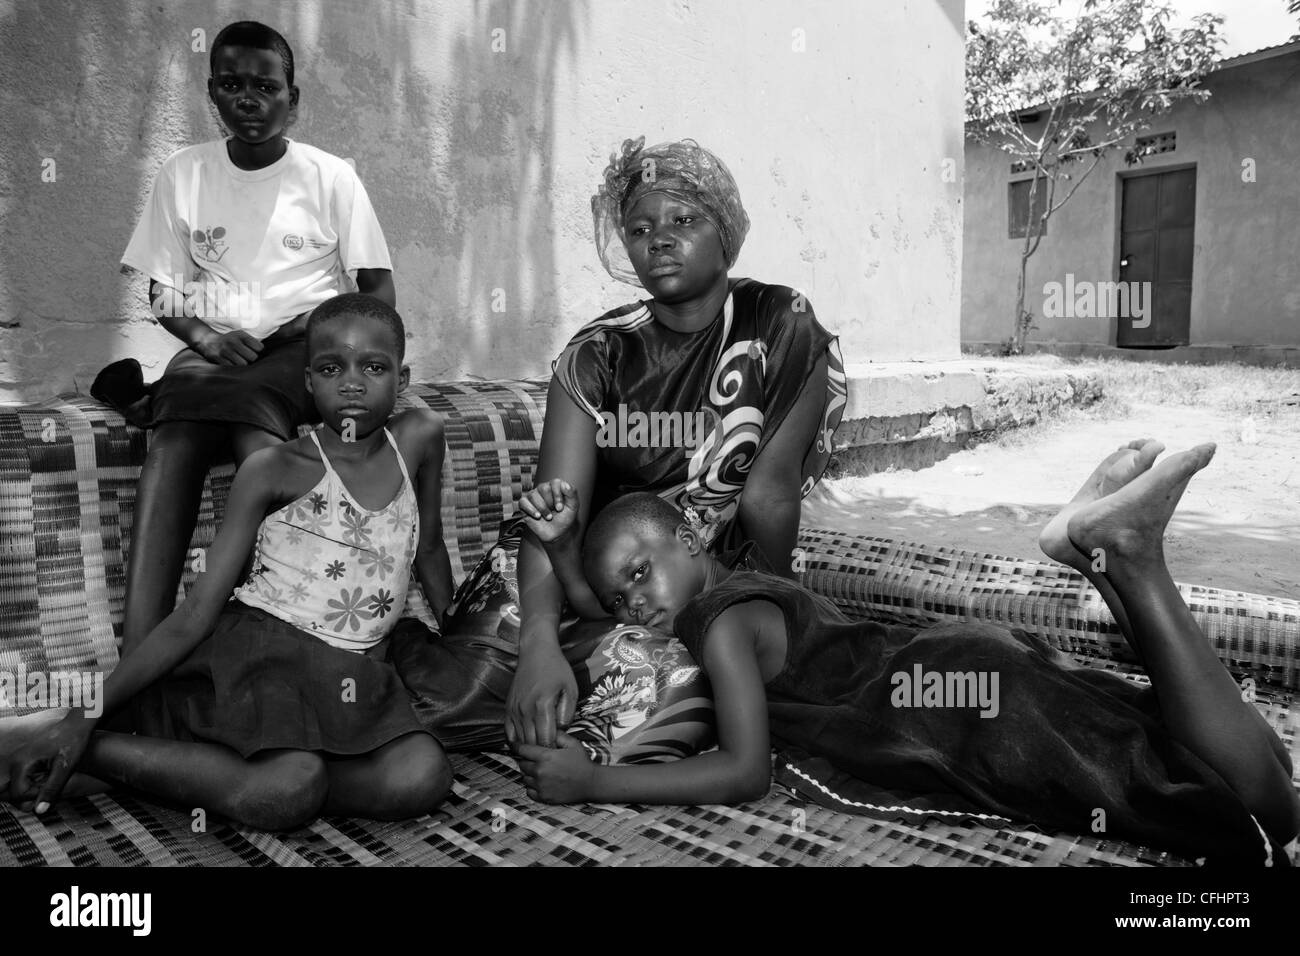 Portrait of one of Joseph Kony's wives and a former child soldier, Amony, with her three children by Kony Stock Photo